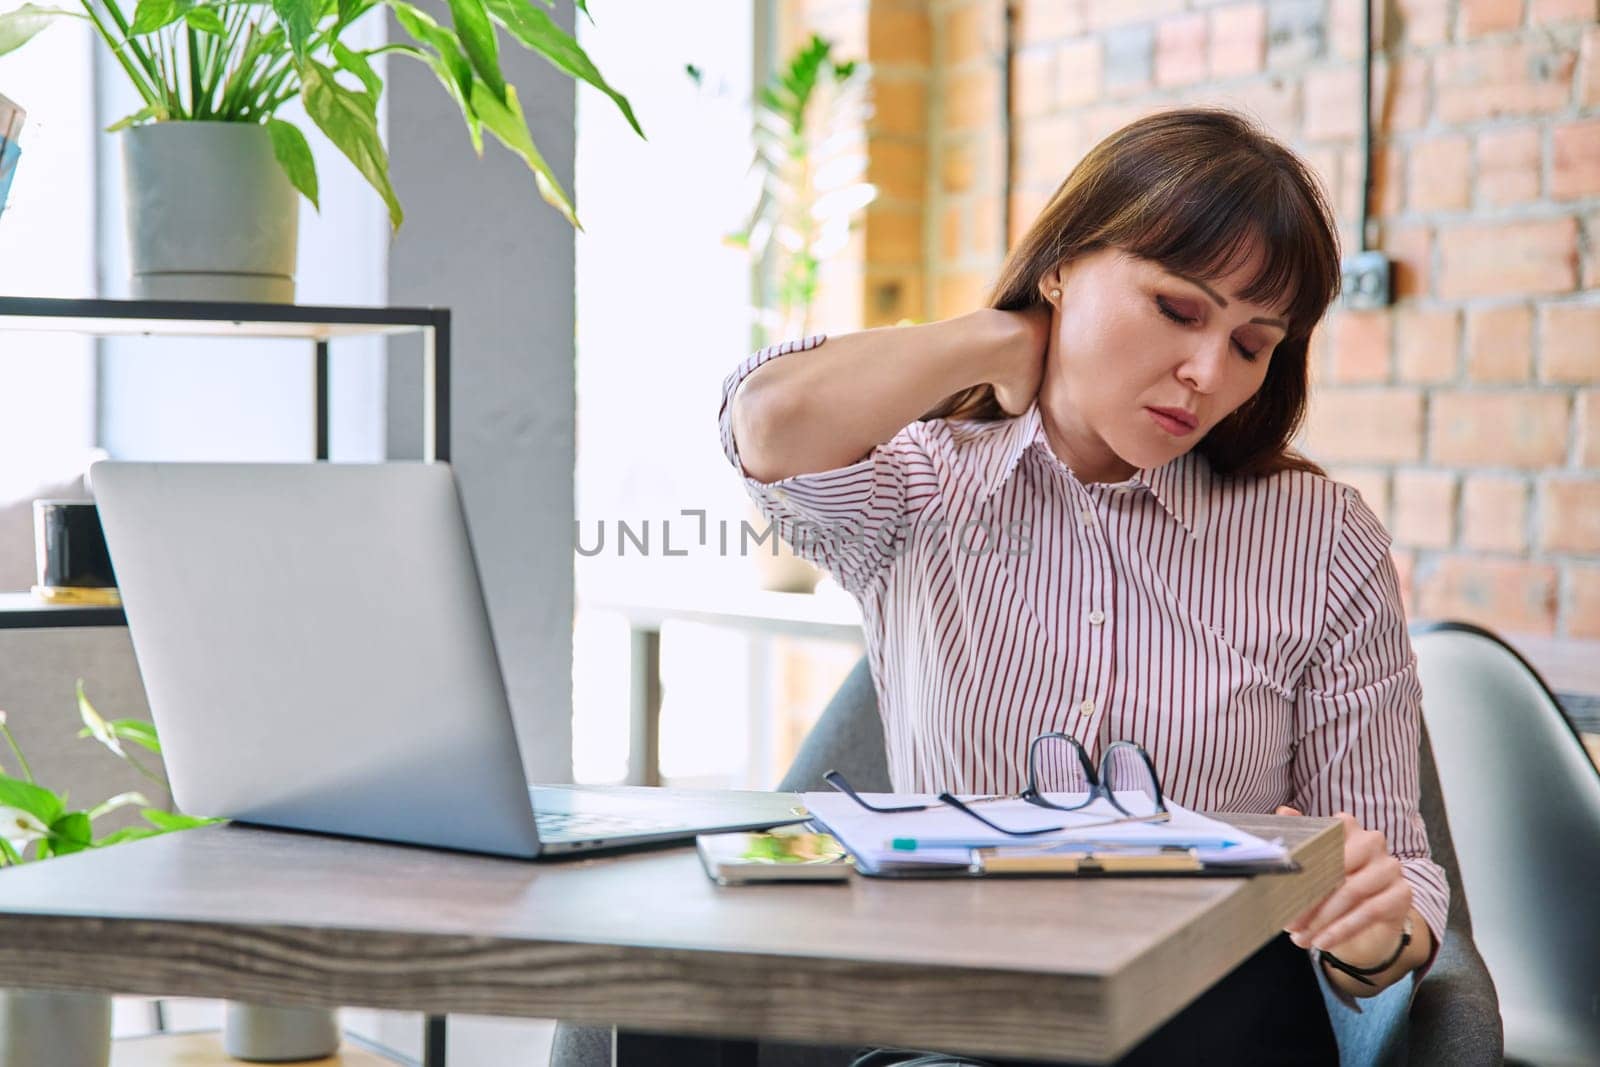 Mature tired worried tense woman at workplace experiencing neck and back pain, stress headache. Health problems older age hormonal diseases mental difficulties migraine depression anxiety pain injury